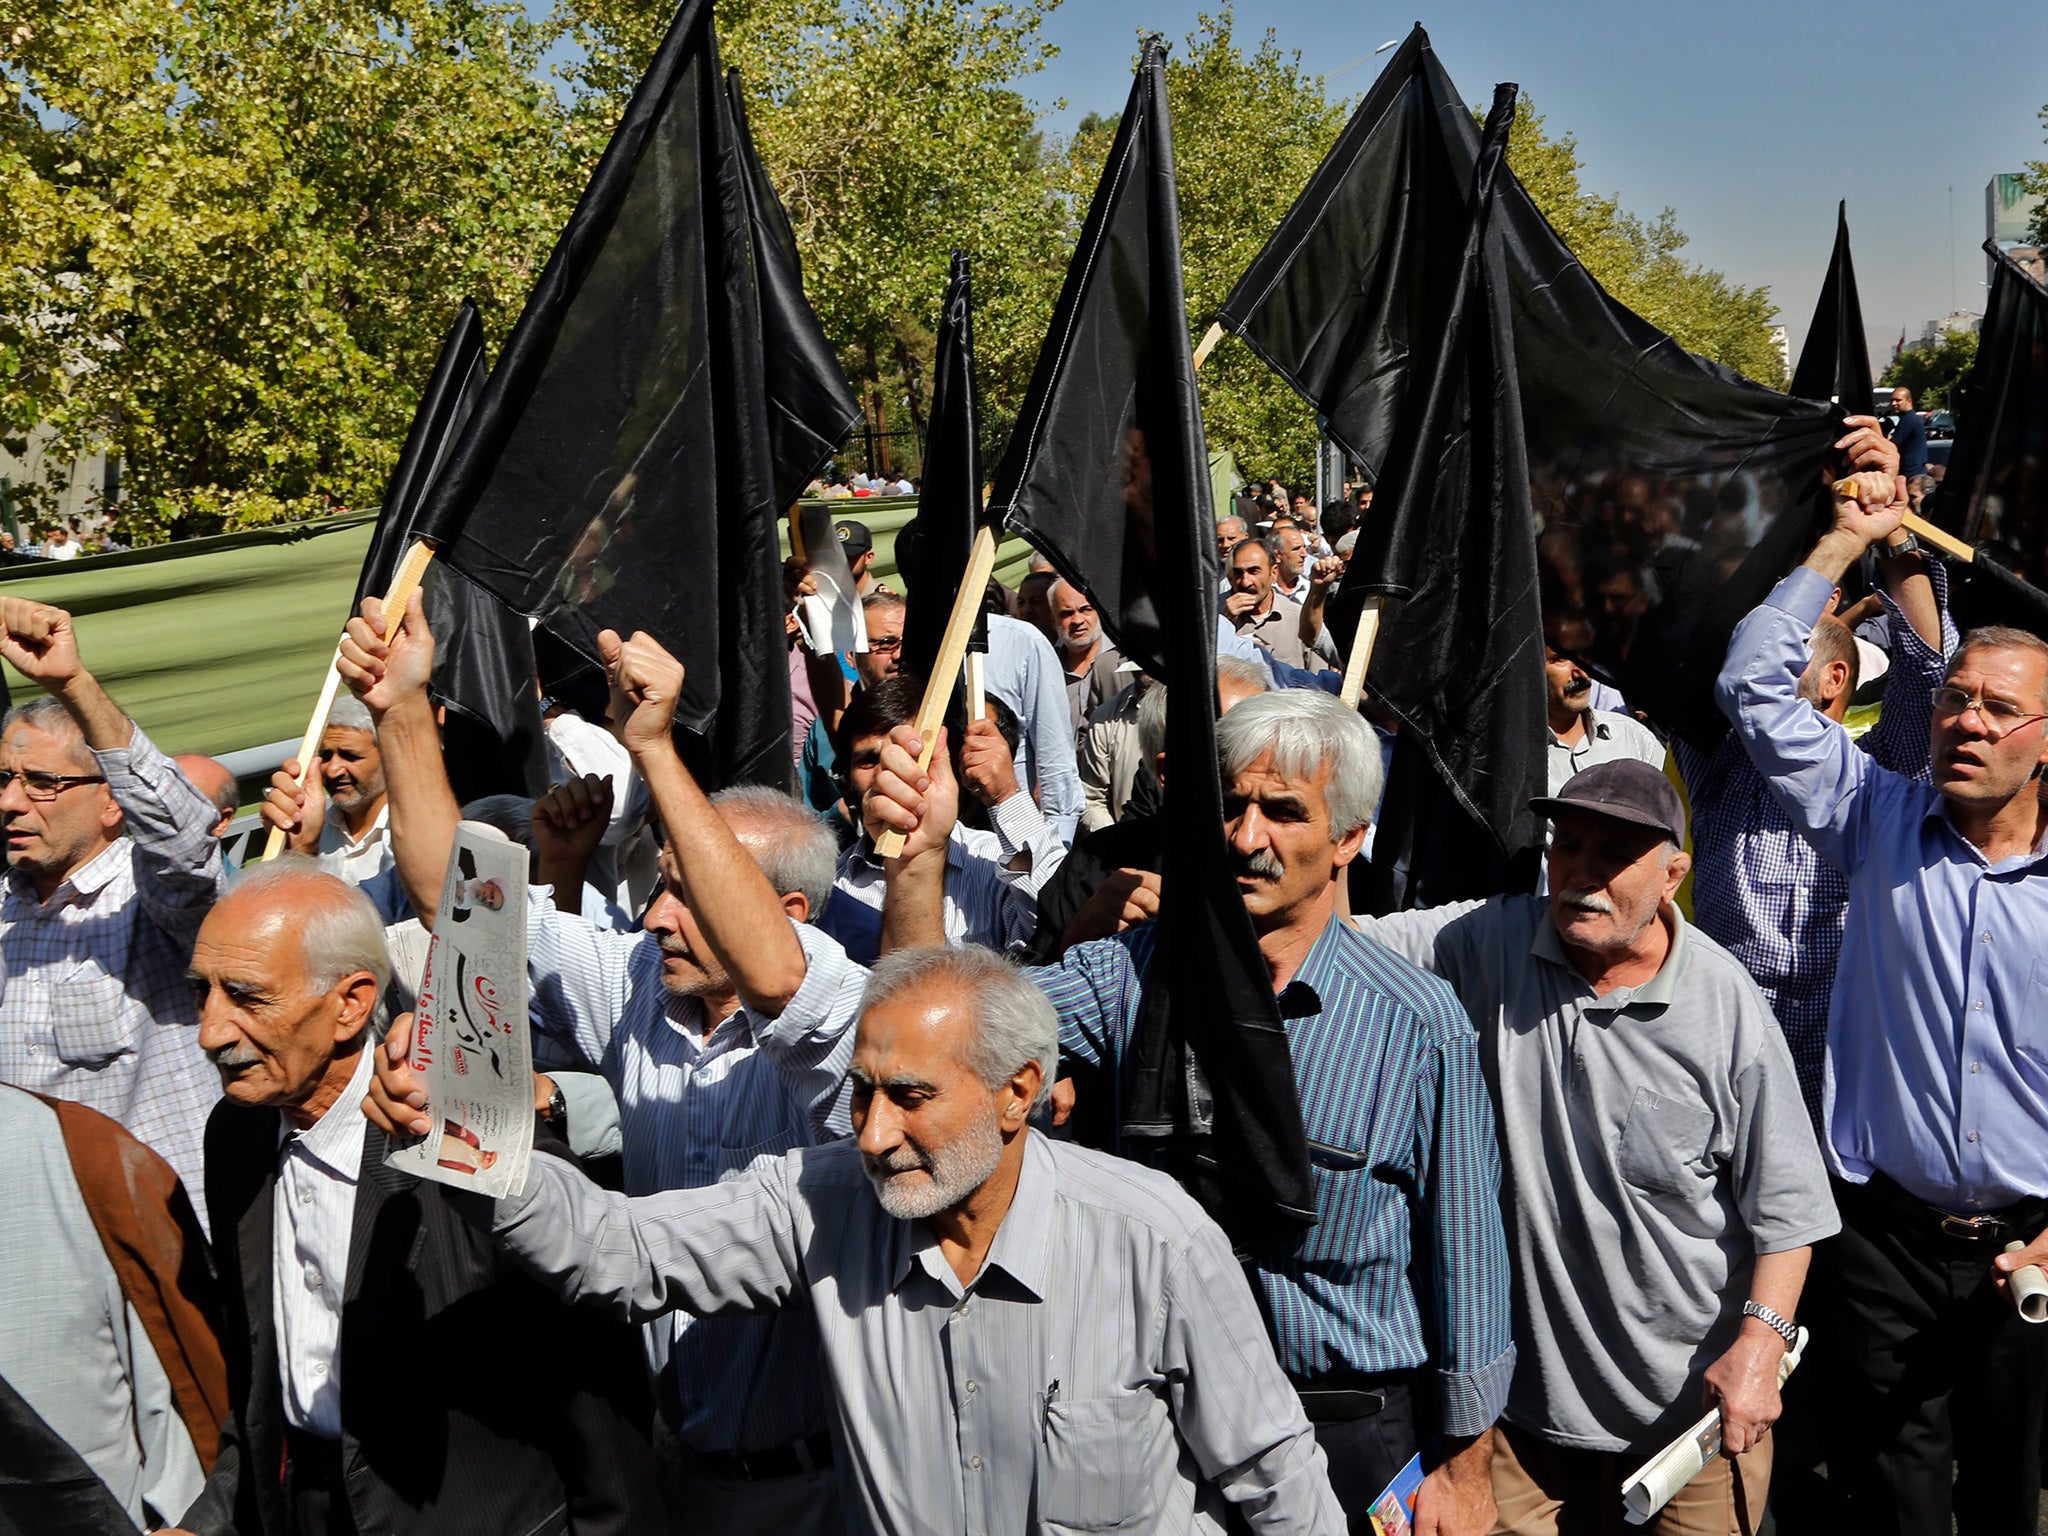 Iranians wave black flags in a show solidarity with those killed while performing Hajj in Mecca, during a protest condemning Saudi Arabia for their role in the tragedy